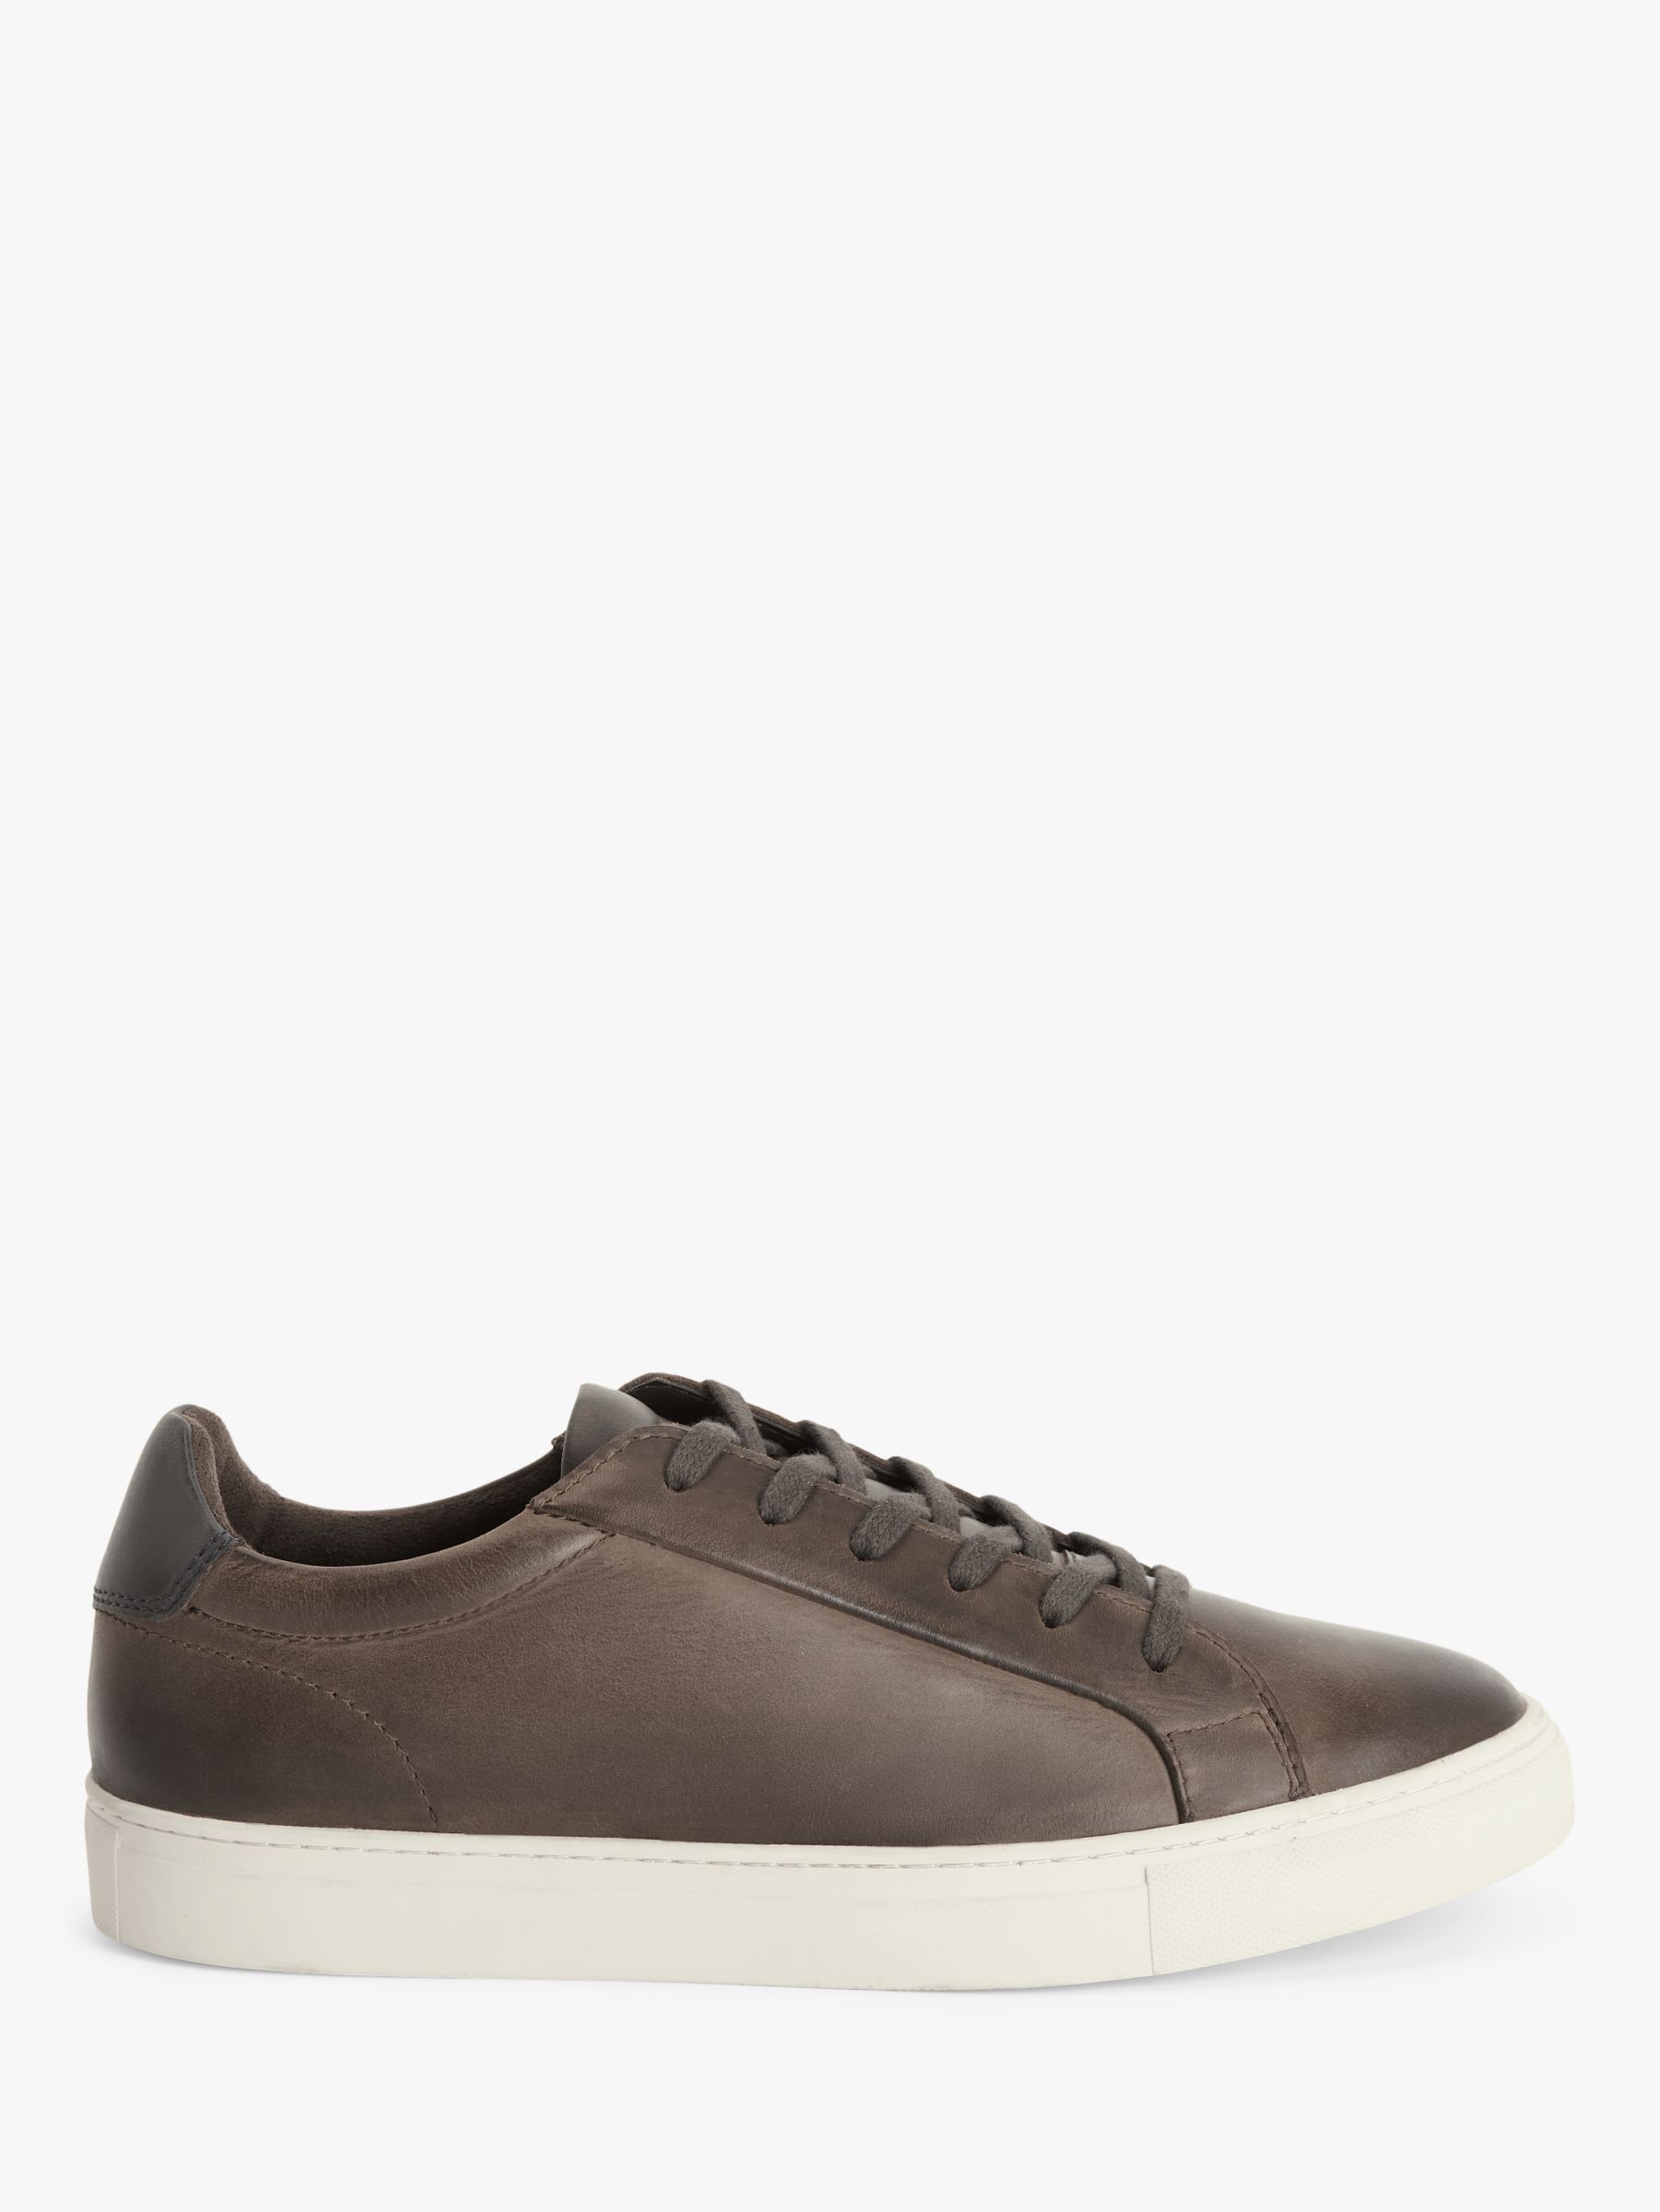 John Lewis Leather Cupsole Trainers, Dark Brown, 7